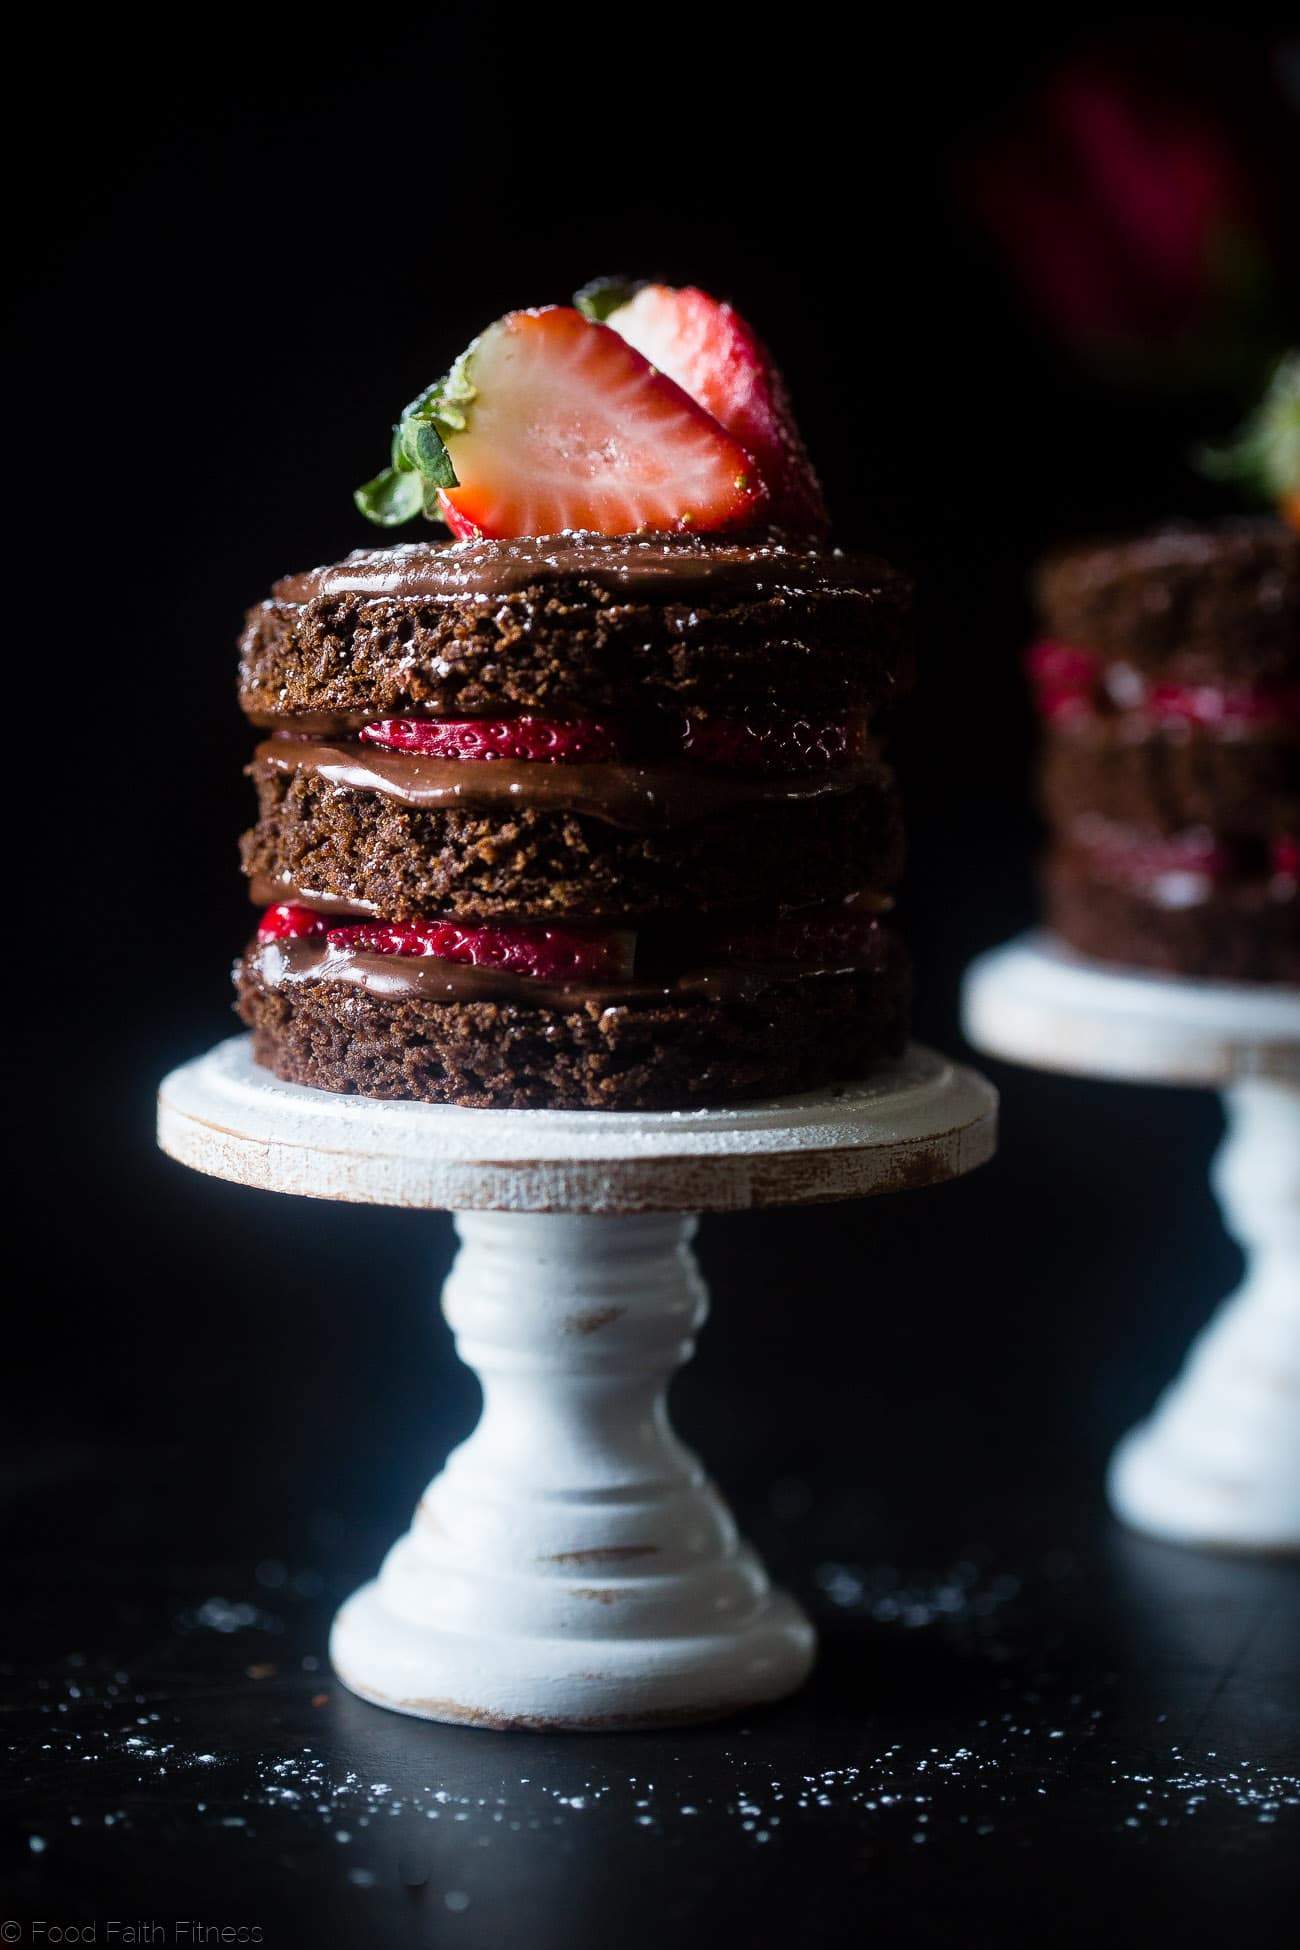 Mini Strawberry Chocolate Cakes For Two - This mini strawberry gluten free chocolate cake recipe makes 2 mini cakes, so it's perfect for two people! A healthier, grain free dessert for Valentine's Day! | Foodfaithfitness.com | @FoodFaithFit